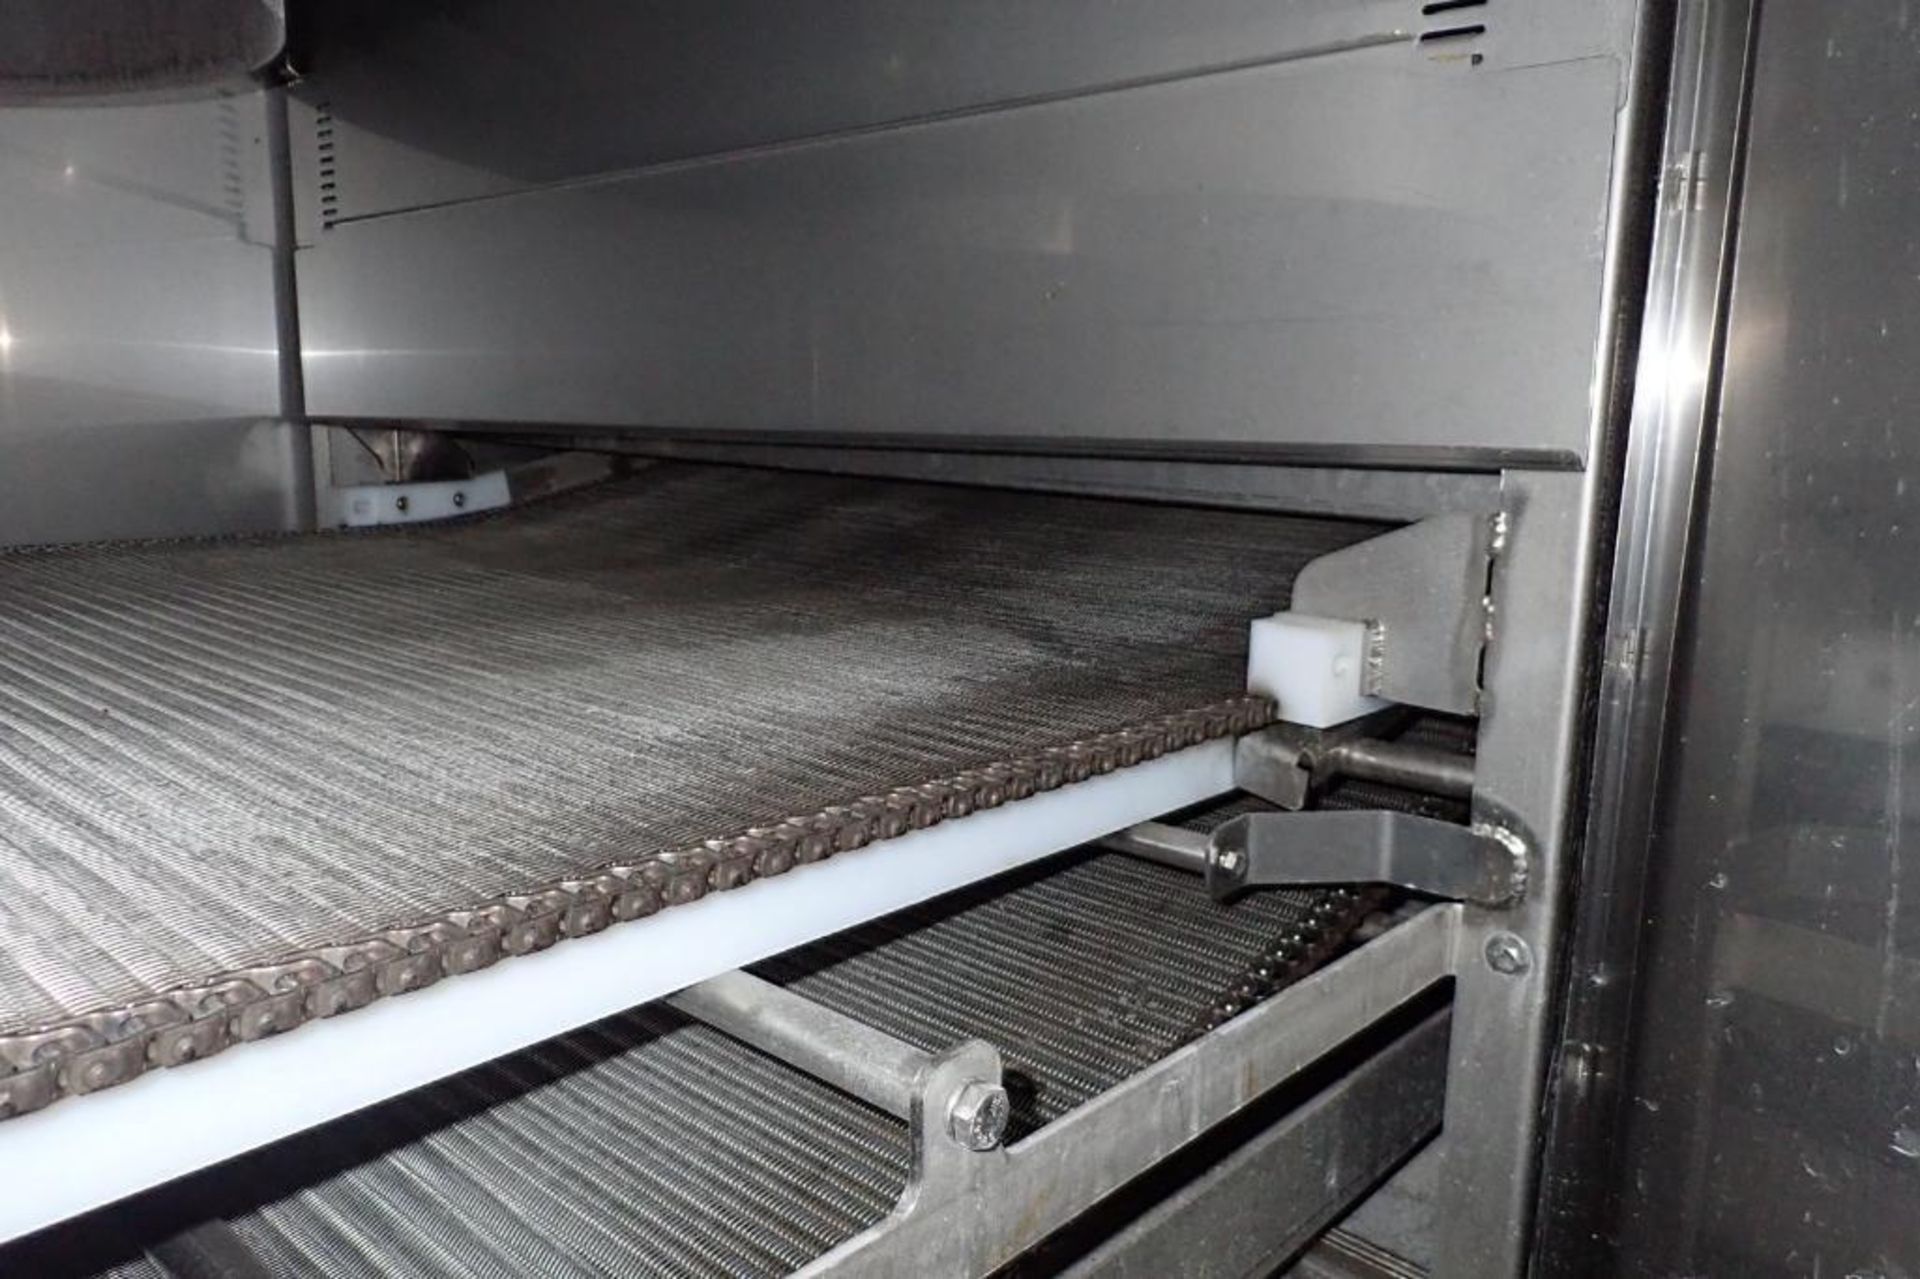 2013 Praxair nitrogen cooling tunnel {Located in Indianapolis, IN} - Image 12 of 23